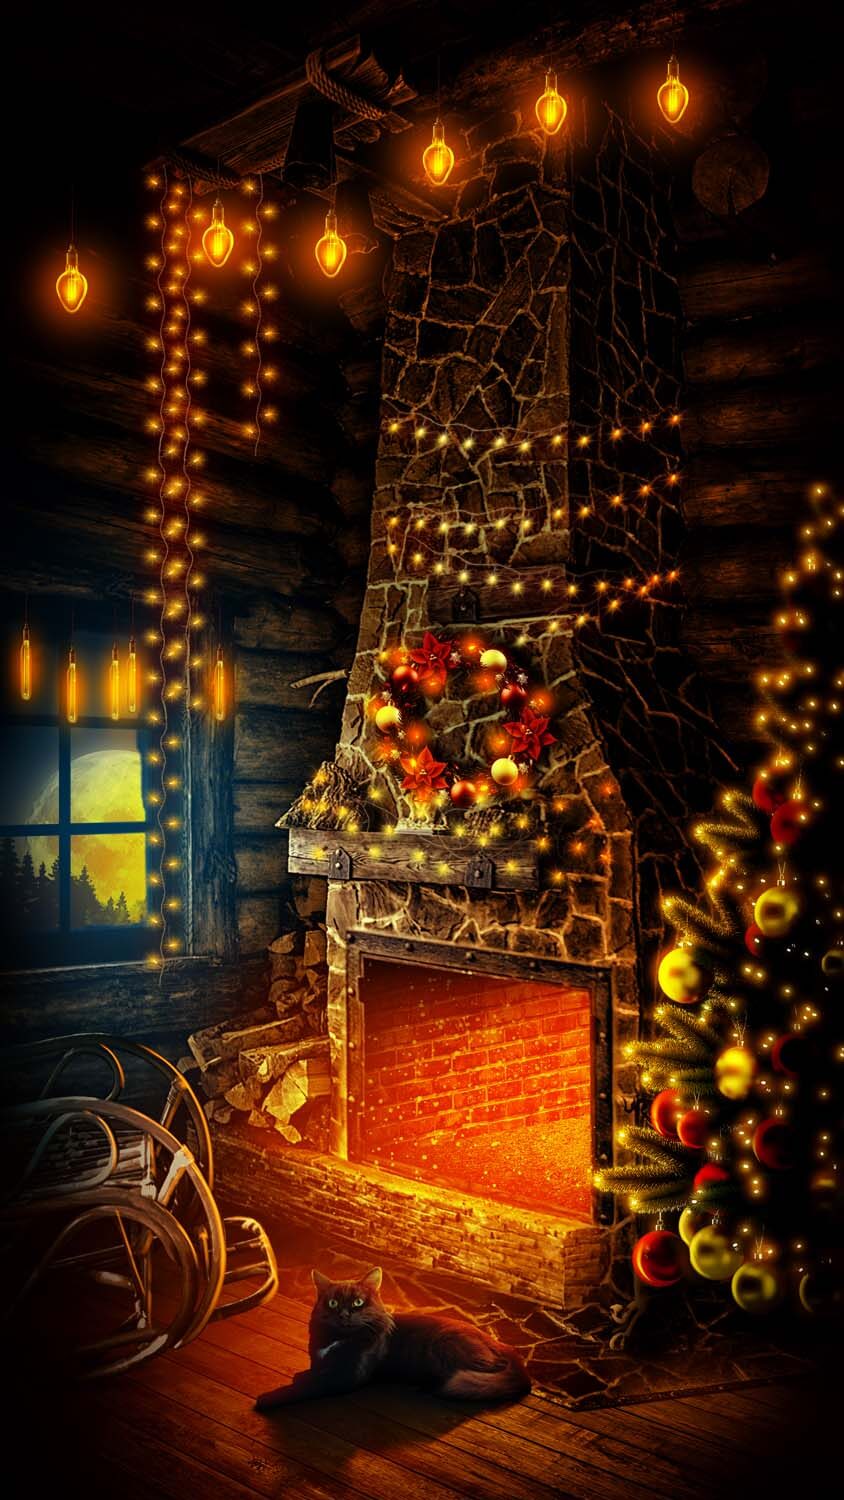 Cozy Christmas IPhone Wallpaper HD - IPhone Wallpapers : iPhone Wallpapers